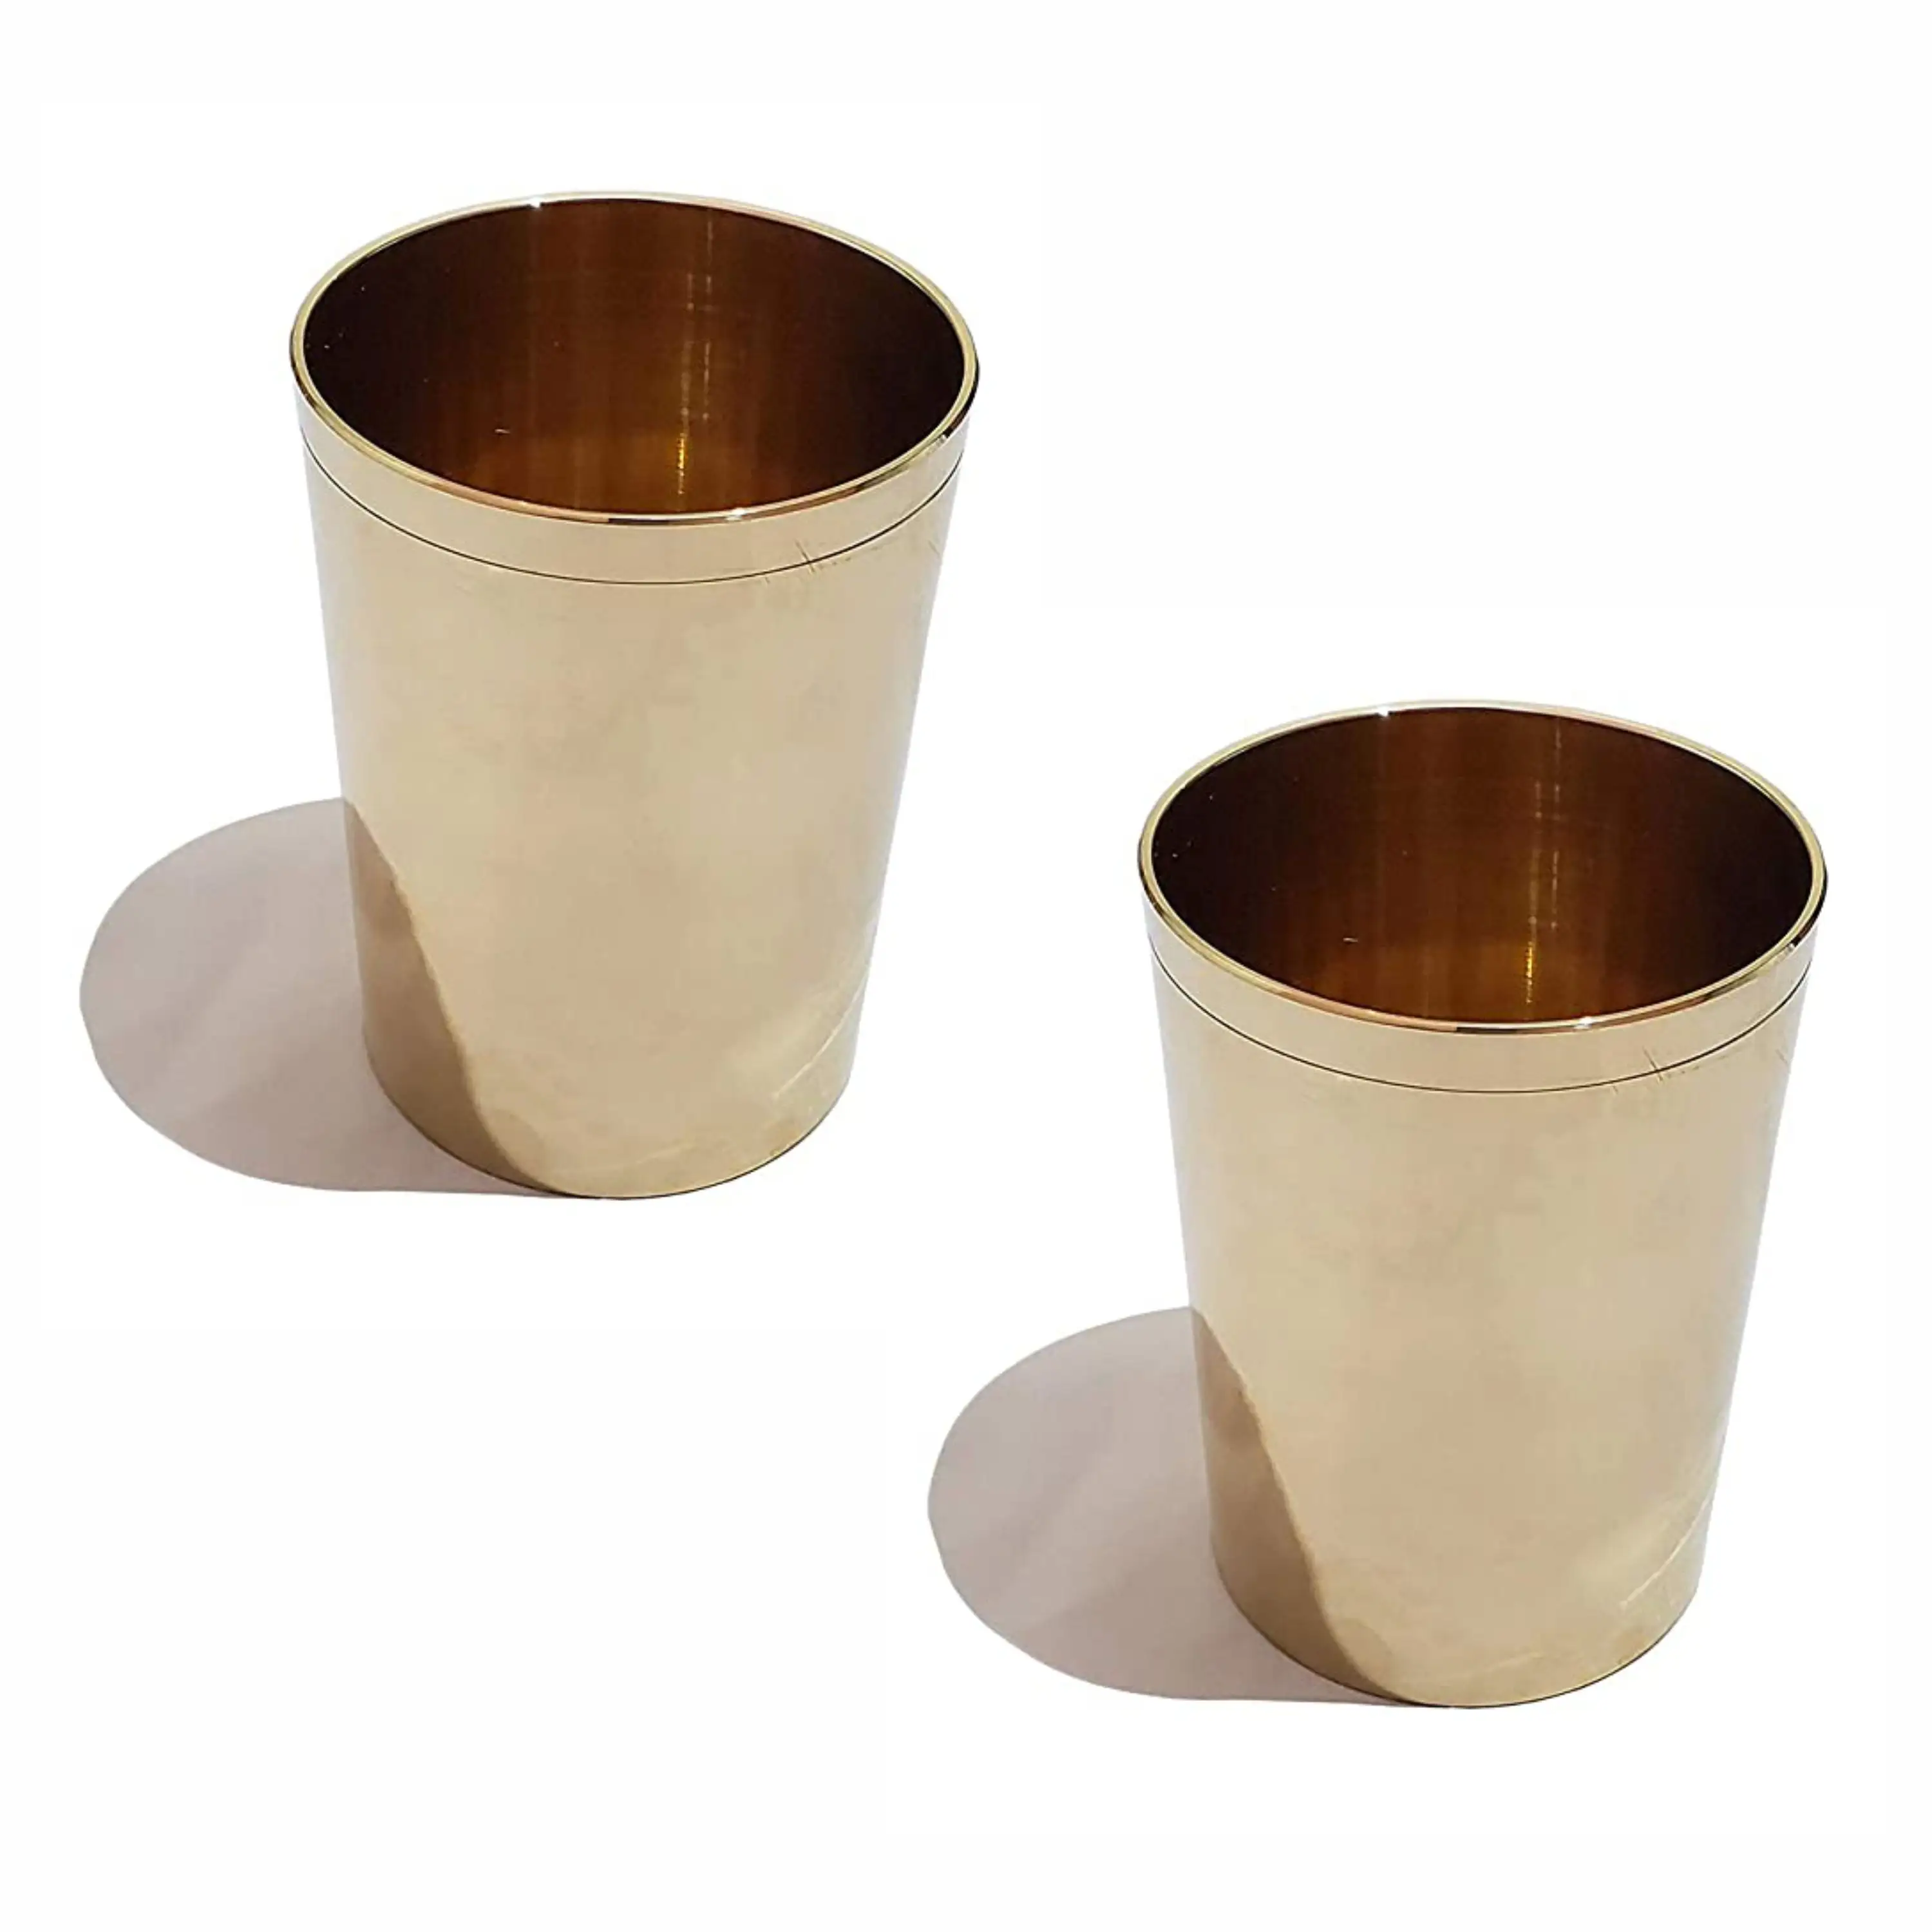 Pure Source India Handmade Bronze Kansa Glass, Small in Size, Many More Health Benefit of Regular Use of This Glass (2 Pcs)